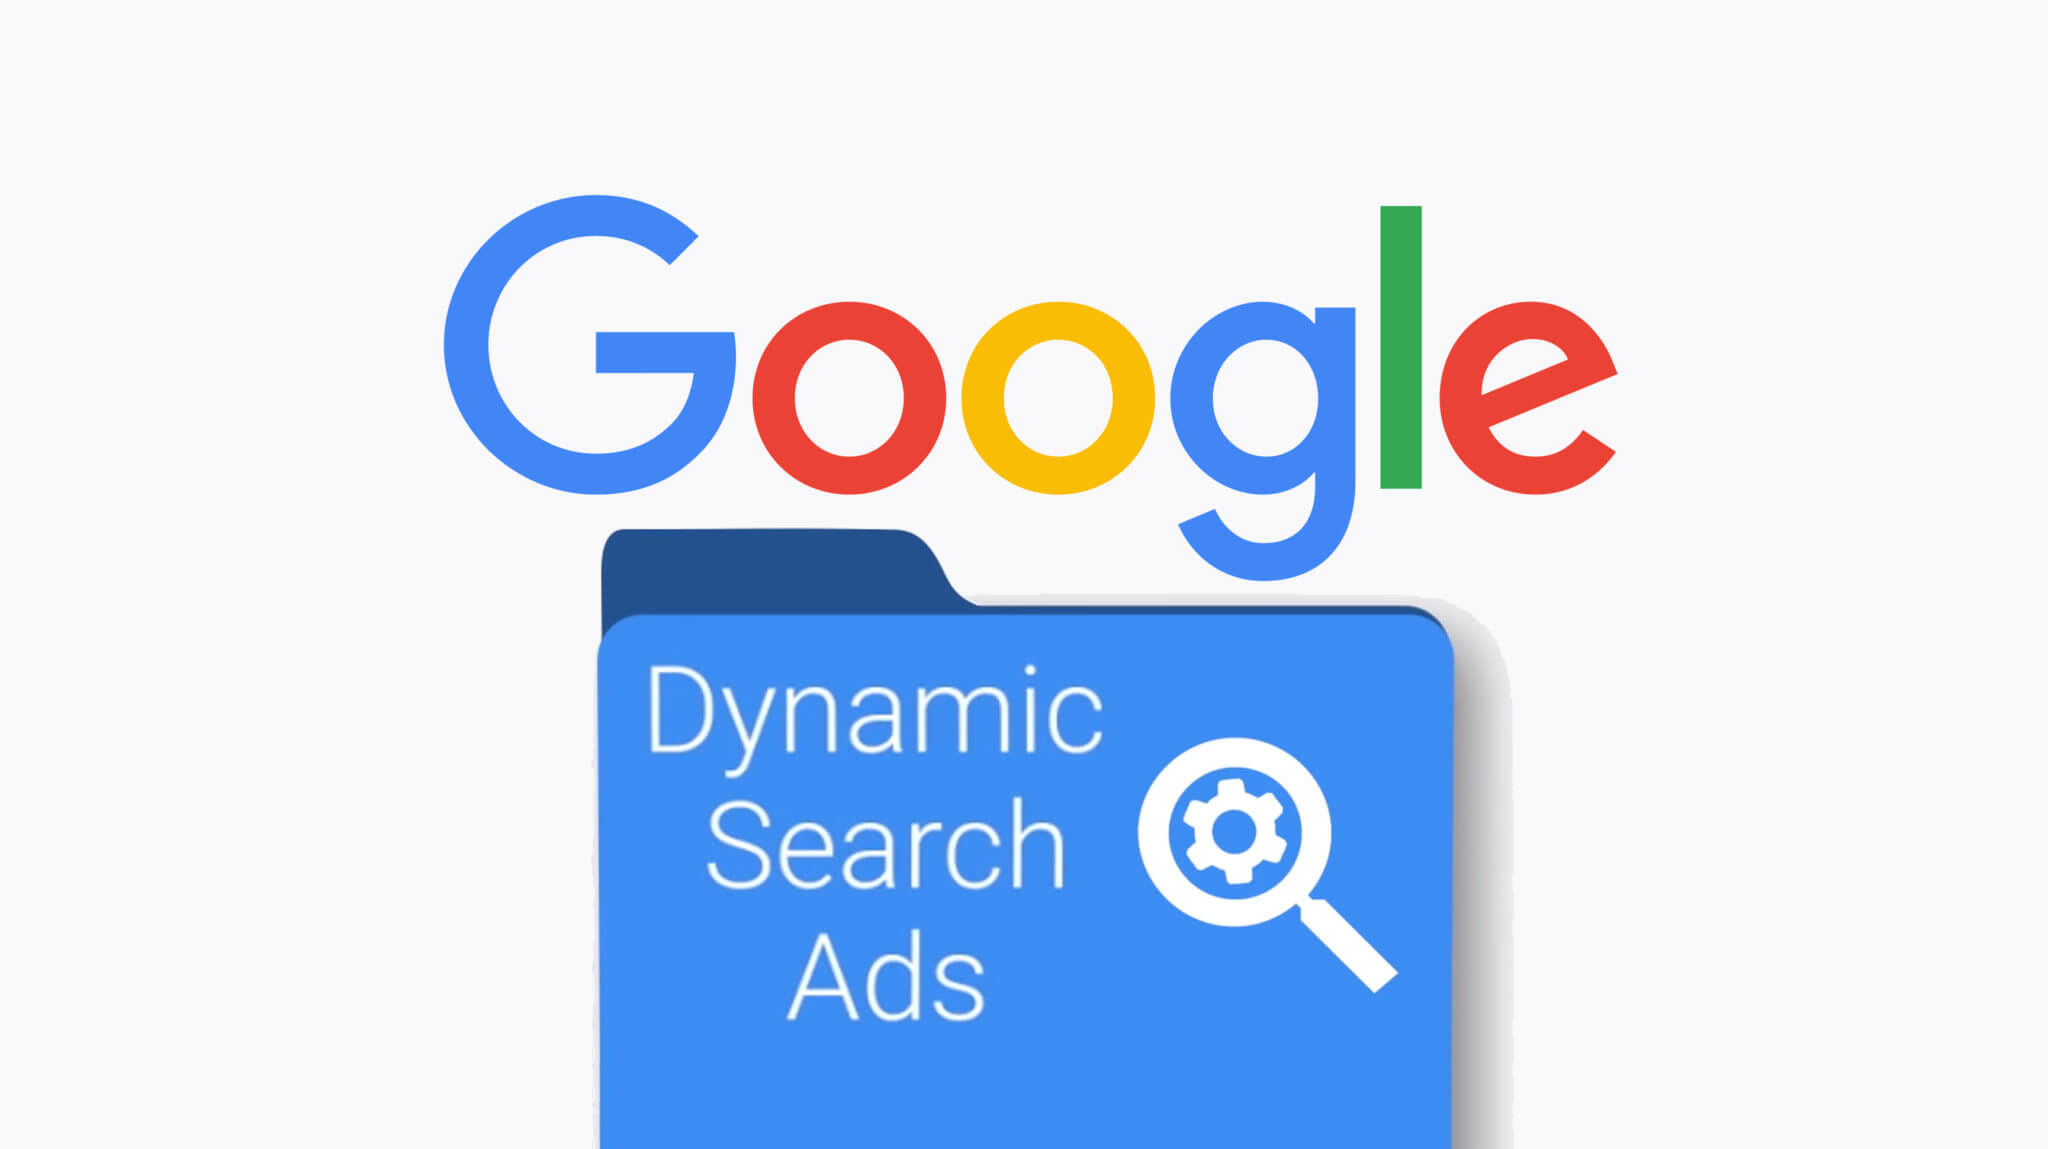 How do Dynamic Search Ads work